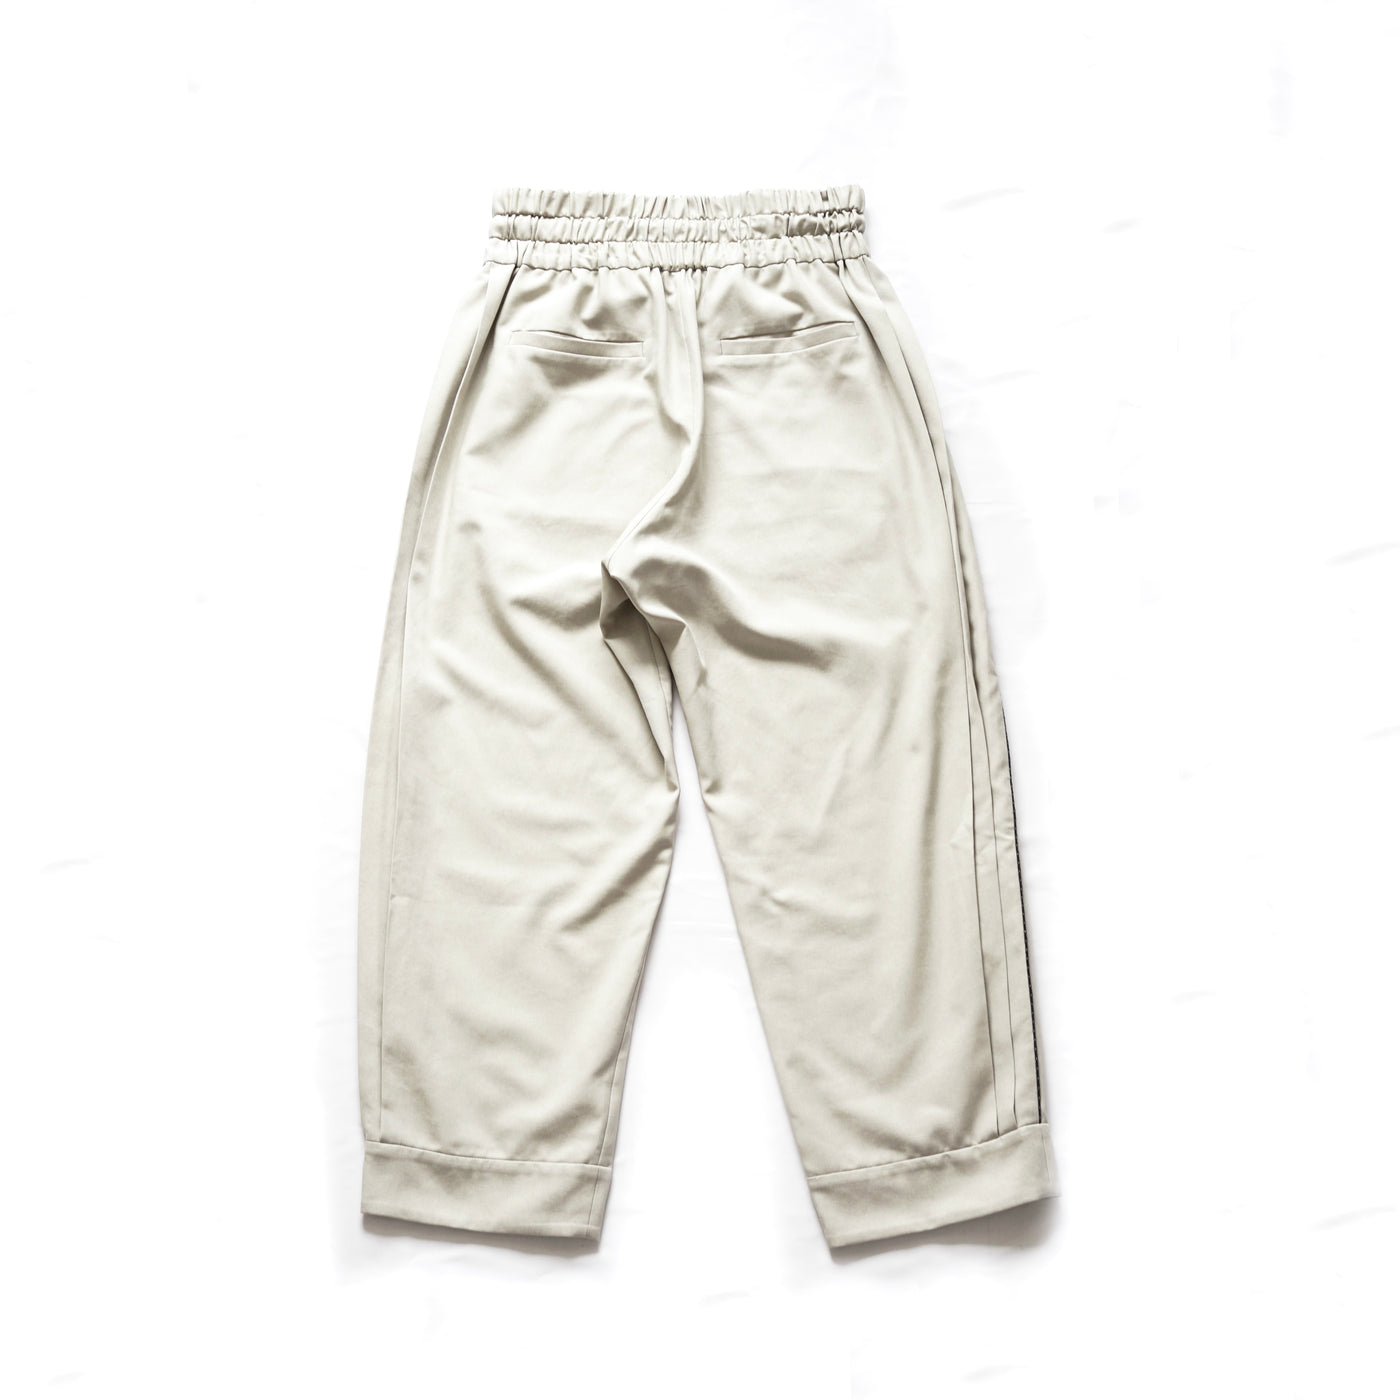 Polyester Linon pleated track pants 1.2.0